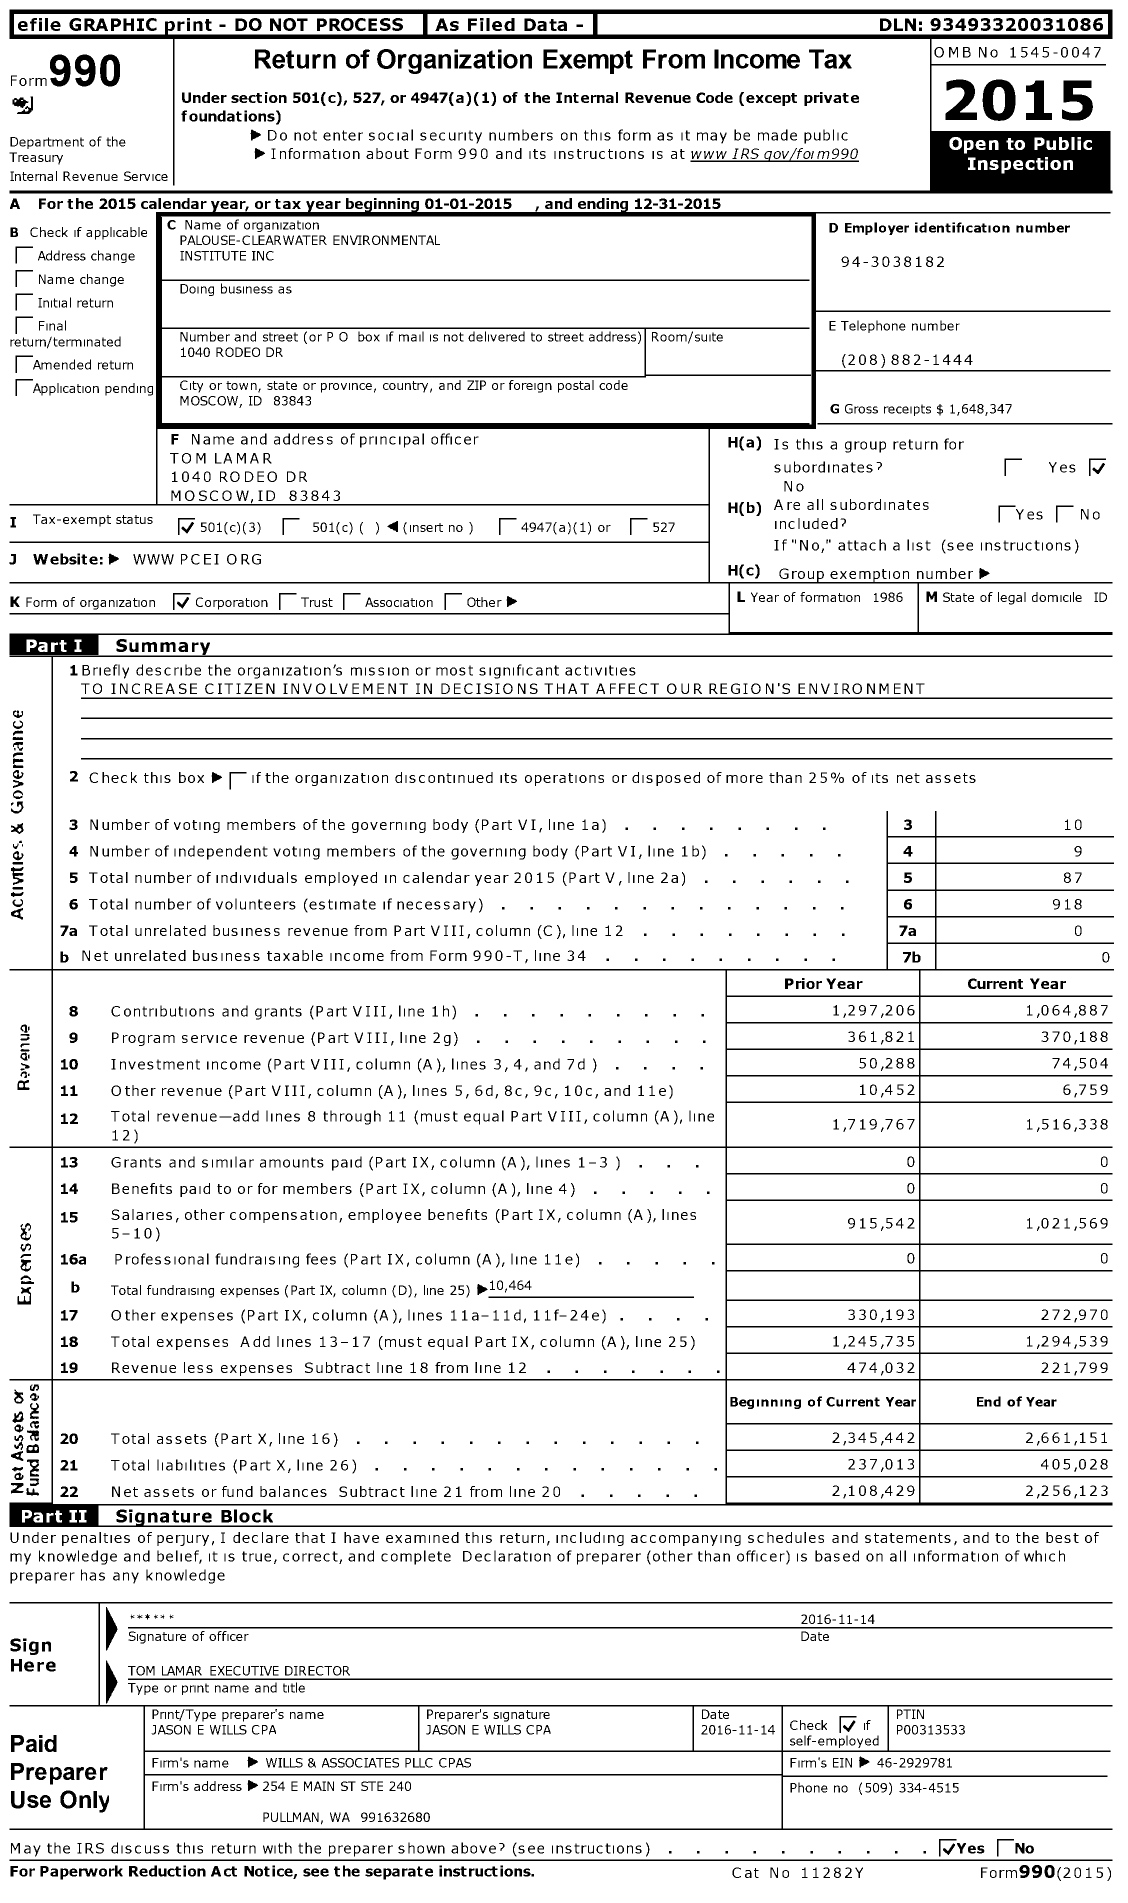 Image of first page of 2015 Form 990 for Palouse Clearwater Environmental Institute (PCEI)